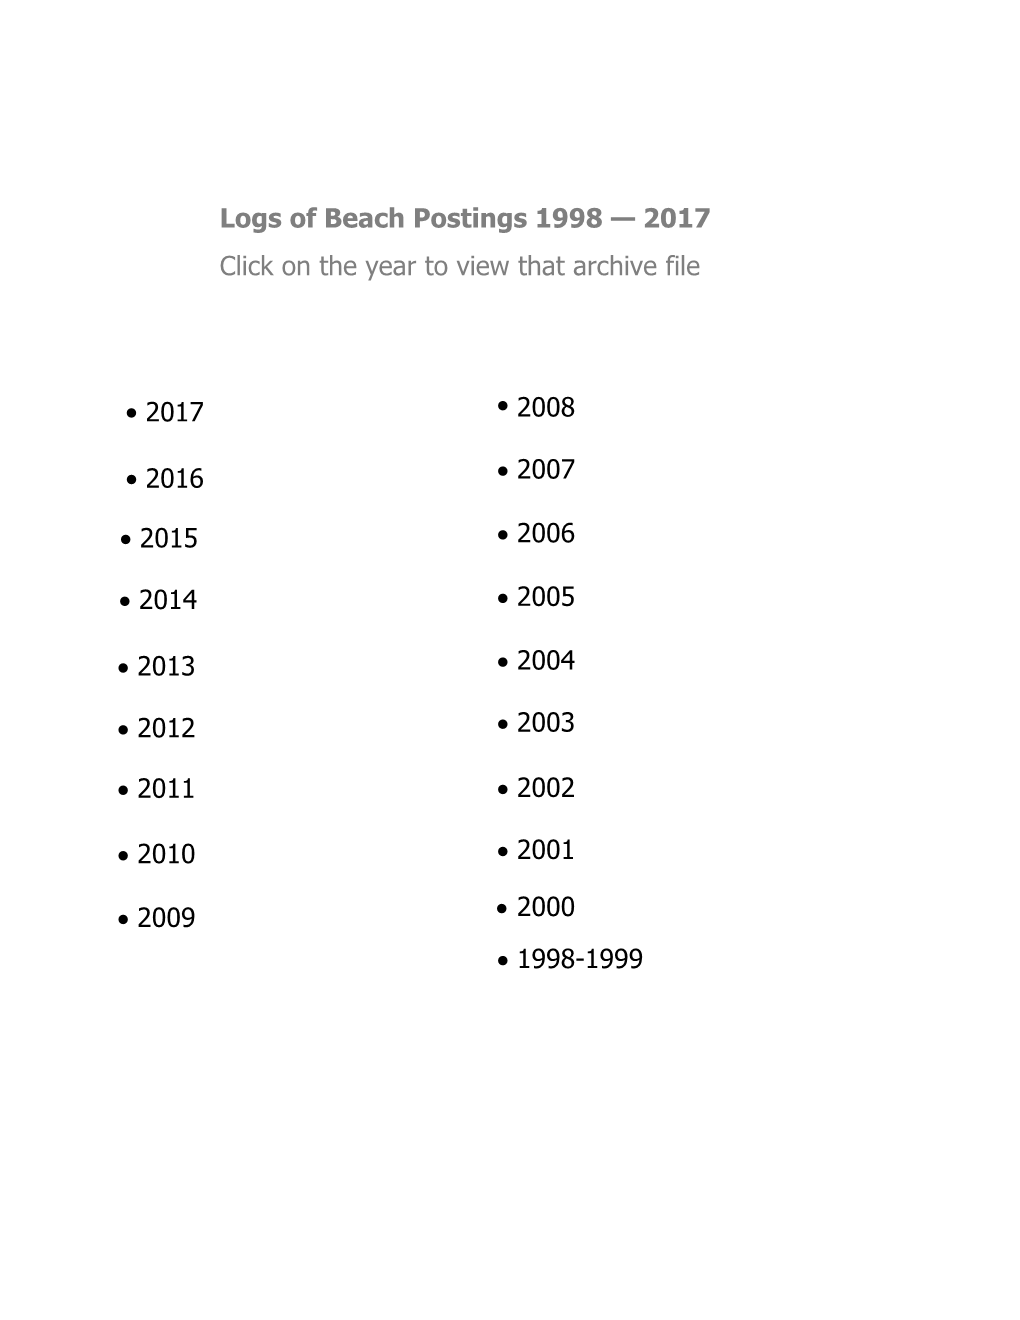 Logs of Beach Postings 1998 — 2017 Click on the Year to View That Archive File